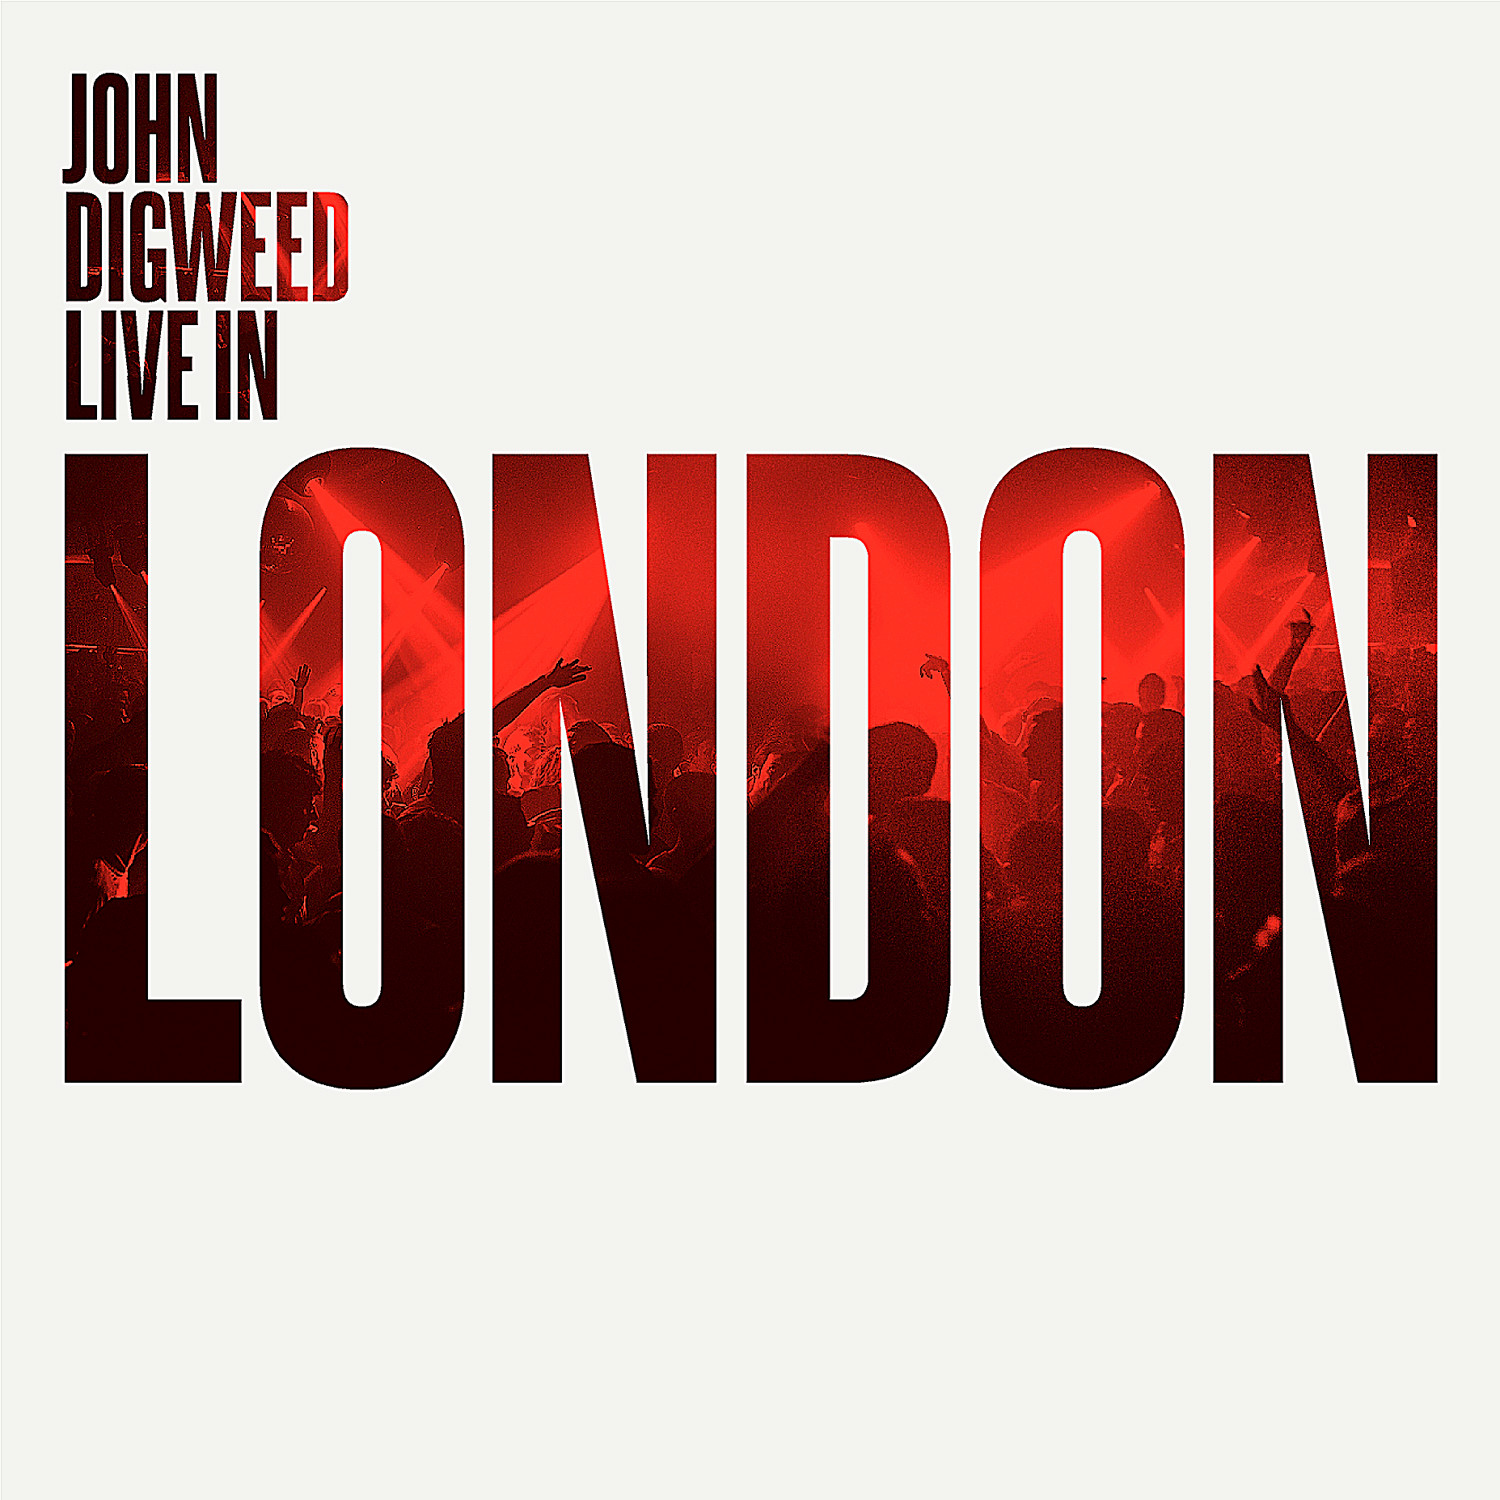 John ******* - Live in London CD4 Continuous Mix